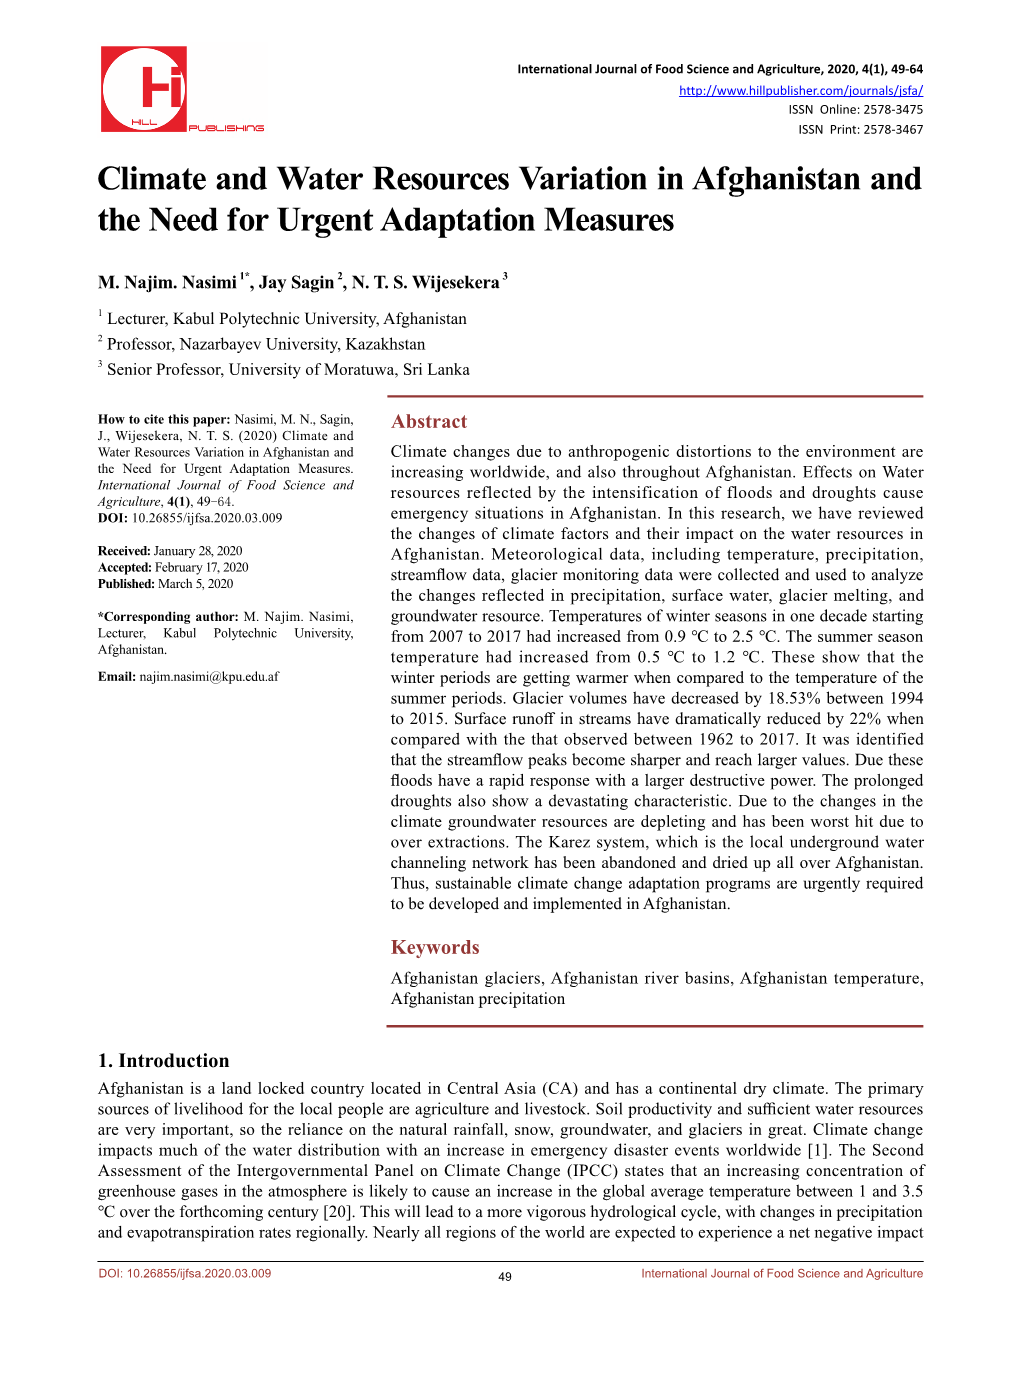 Climate and Water Resources Variation in Afghanistan and the Need for Urgent Adaptation Measures